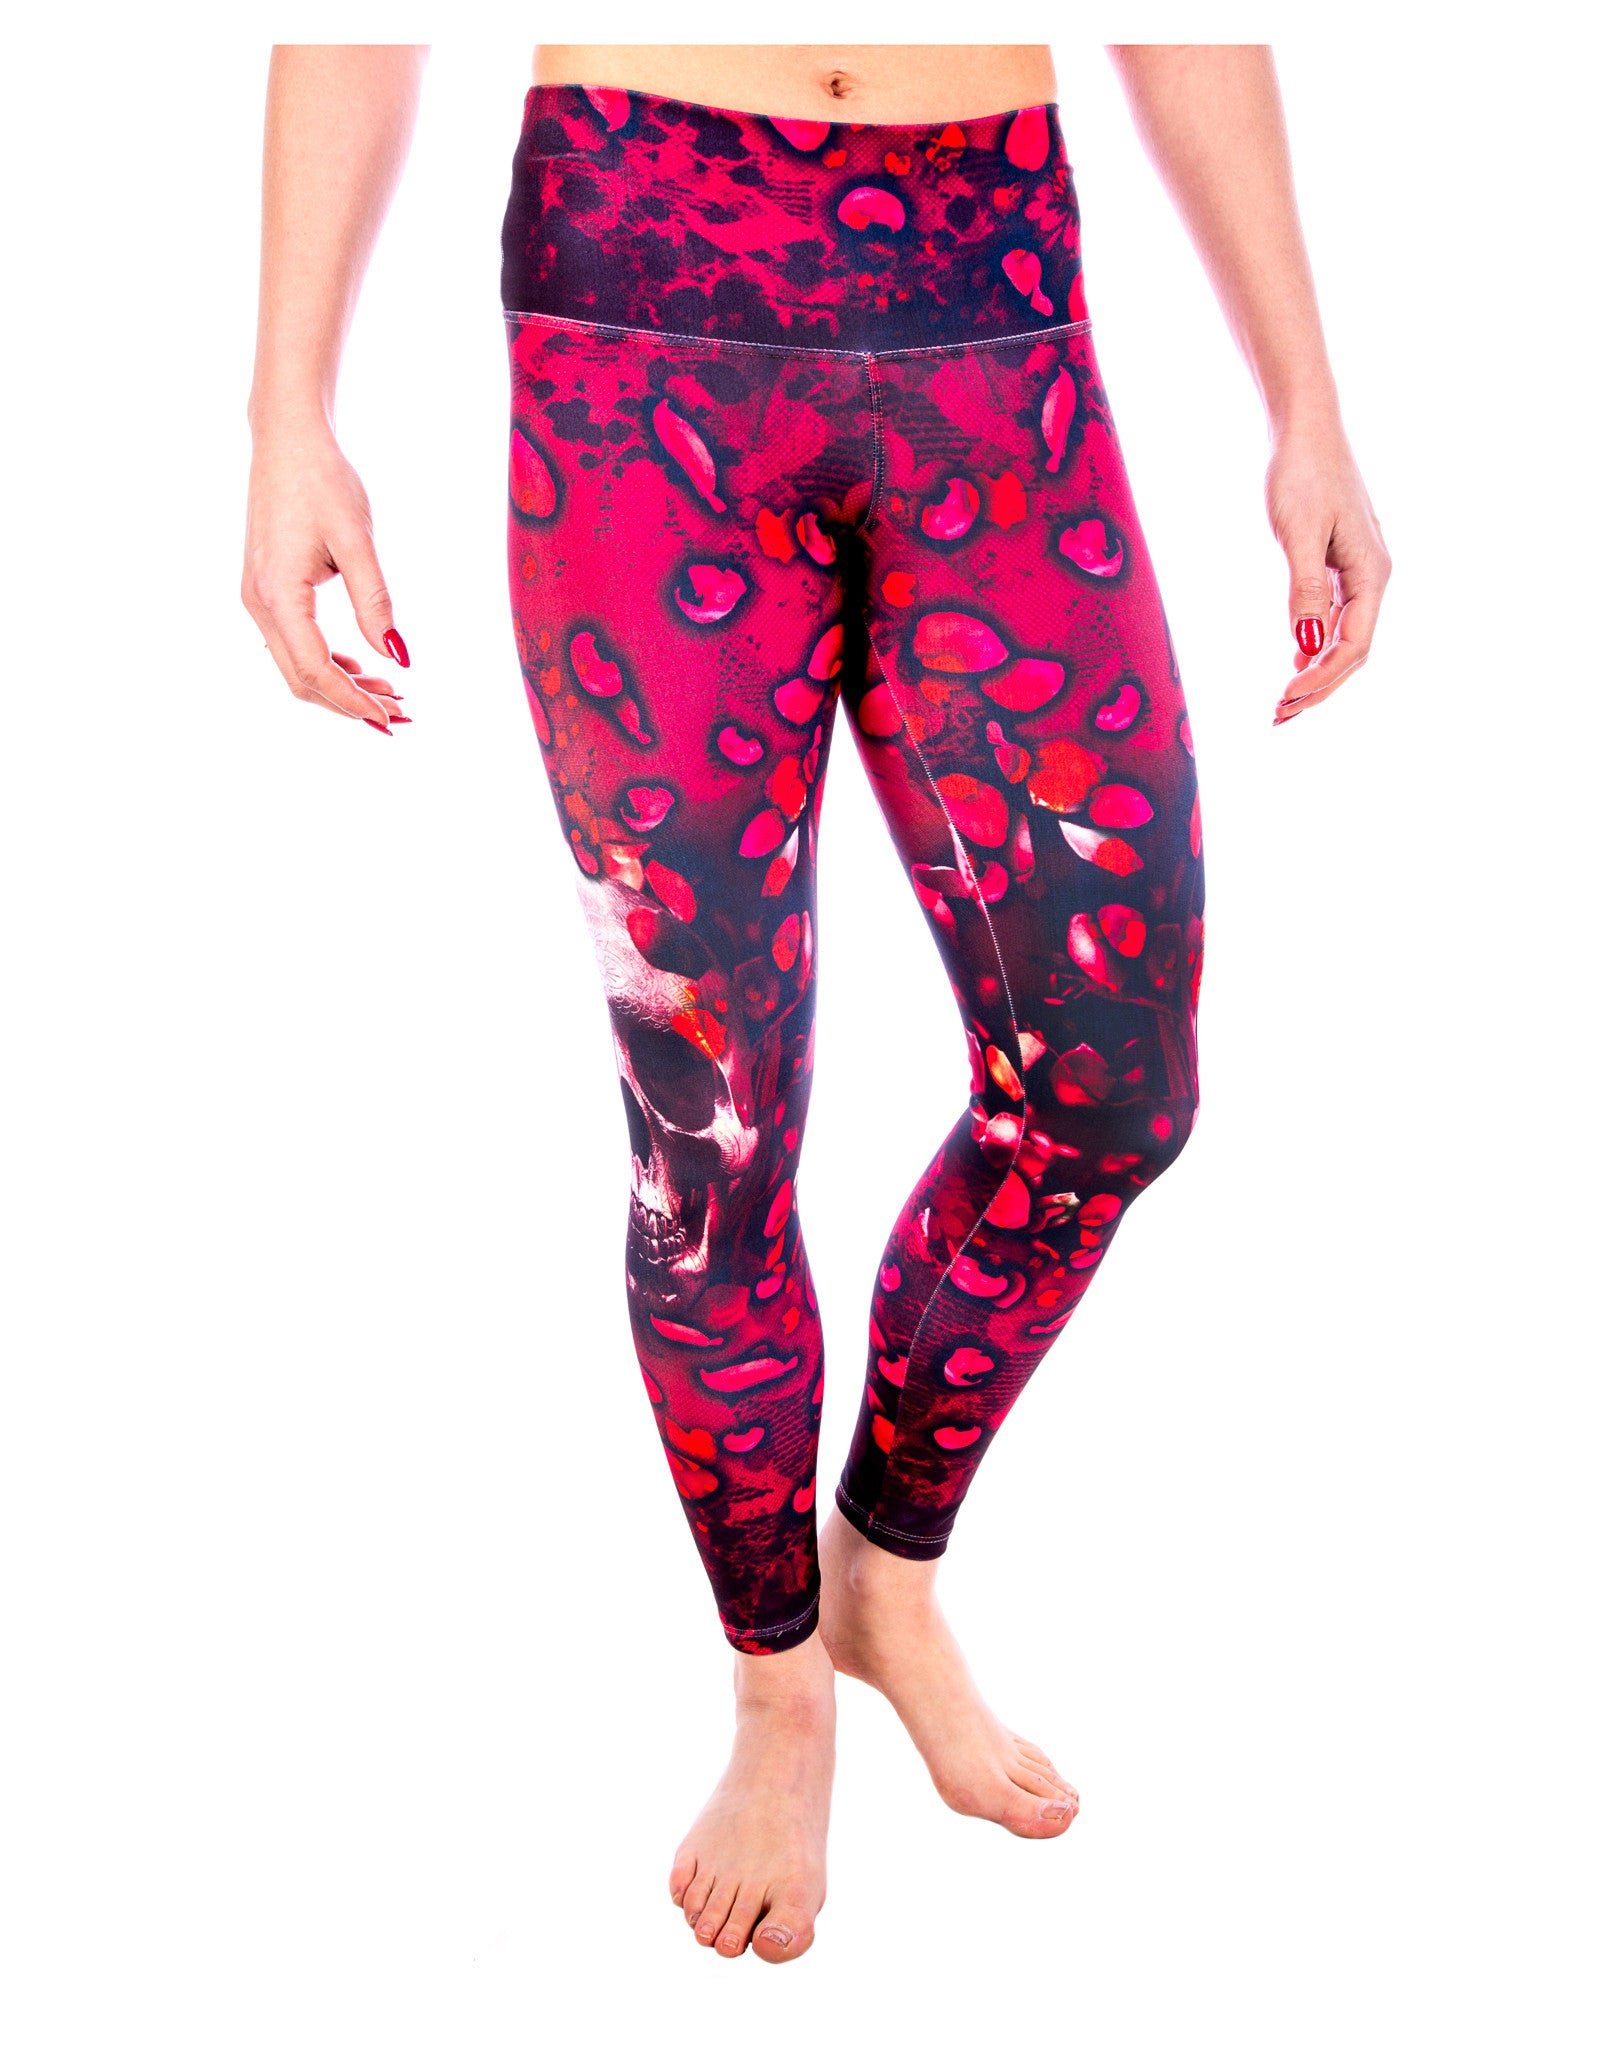 Simple Workout pants with skulls for Push Pull Legs